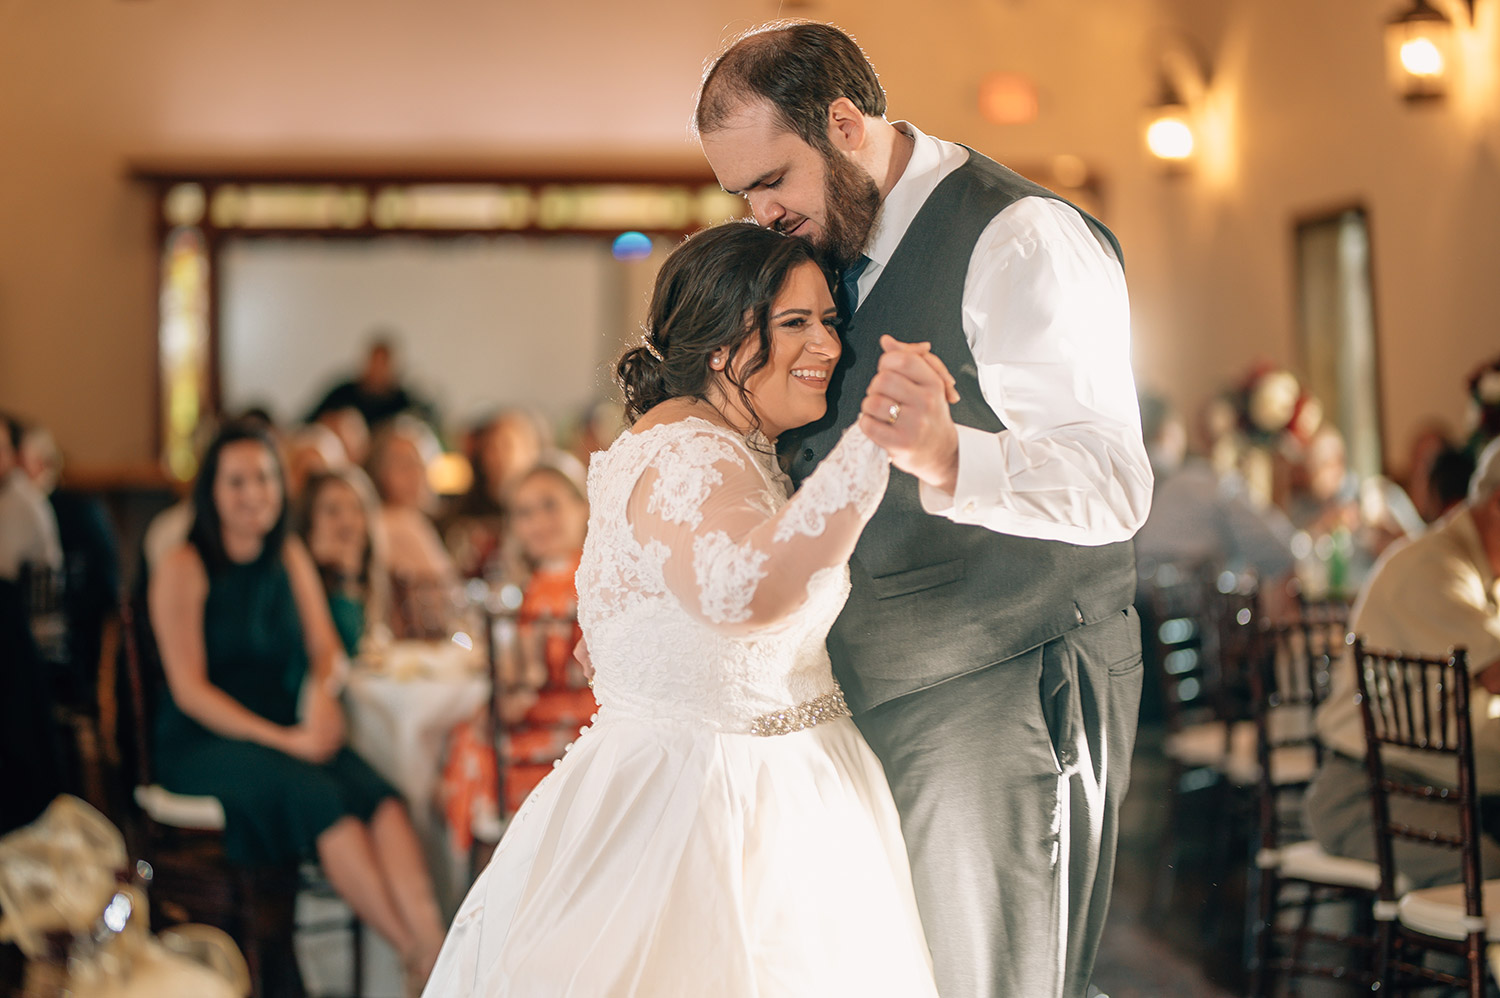 bride and groom first dance during wedding at cotton gin no. 116